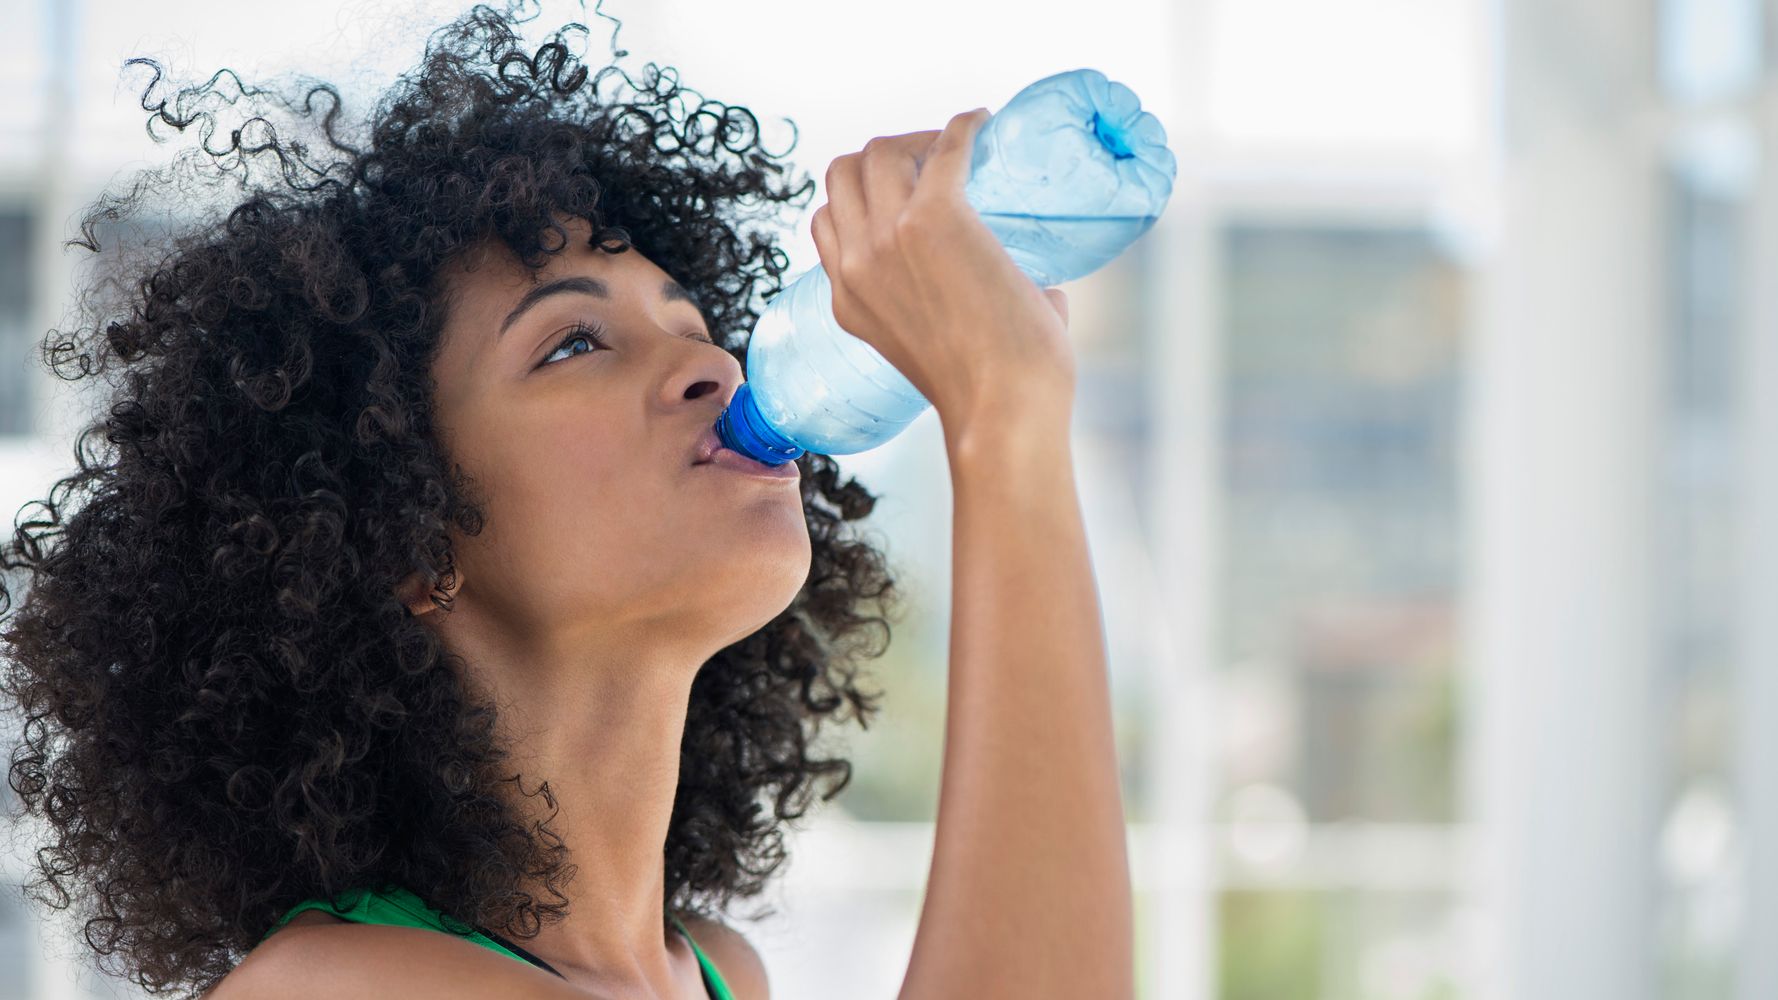 This Is Why Your Body Needs Water Every Day